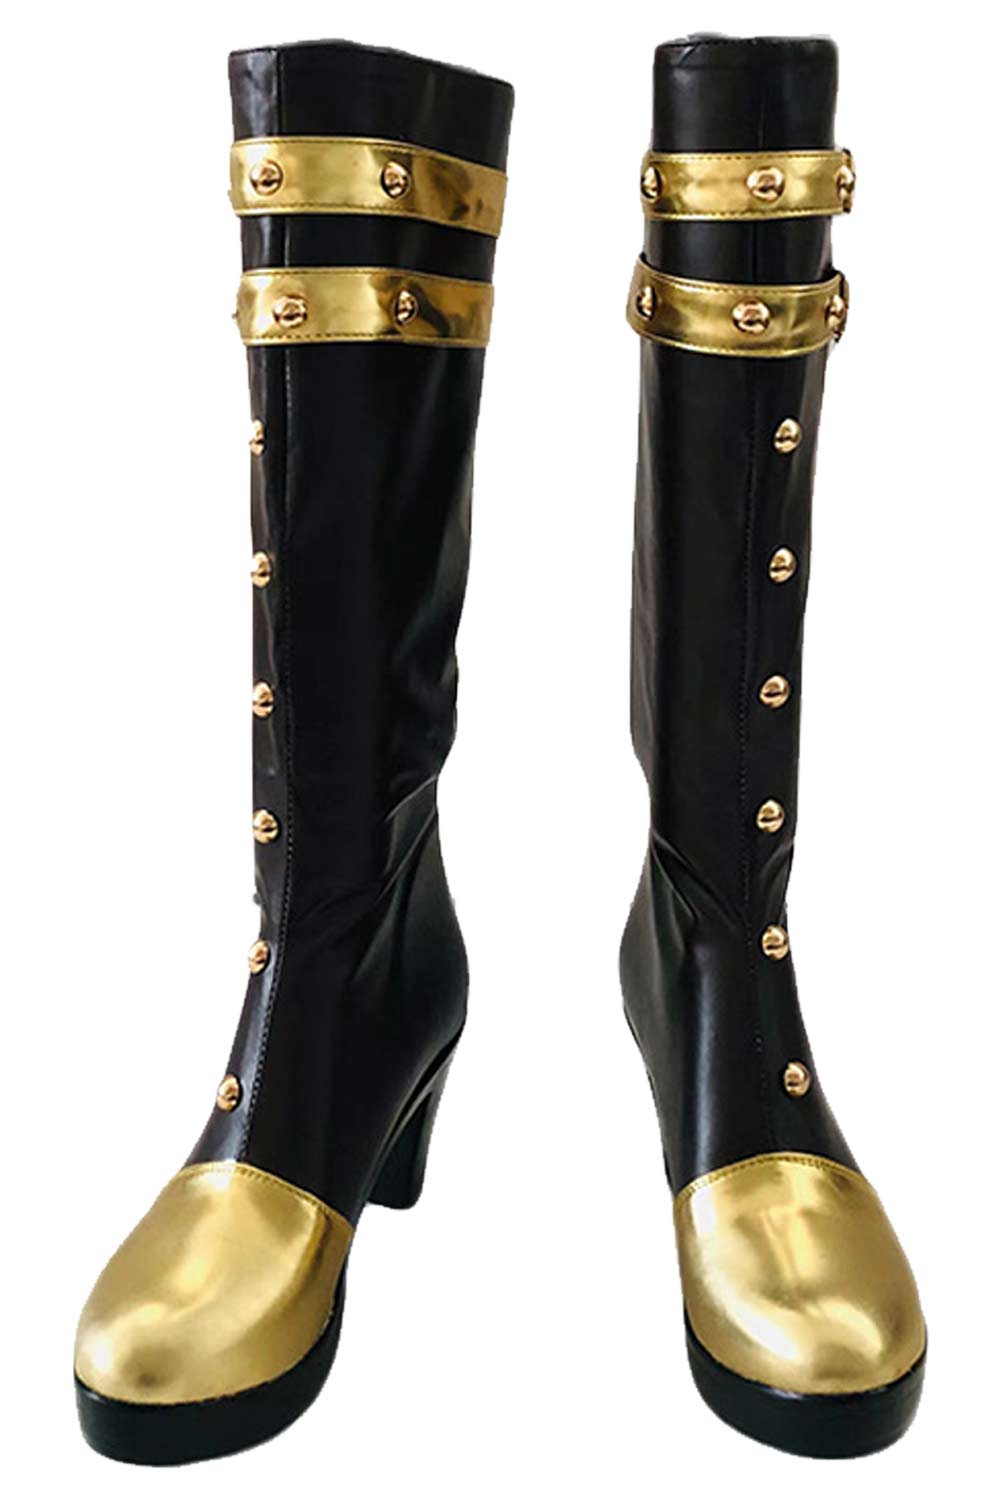 Game League of Legends Caitlyn Kiramman The Sheriff of Piltover Cosplay Shoes Boots Halloween Custom Made Costumes Accessory